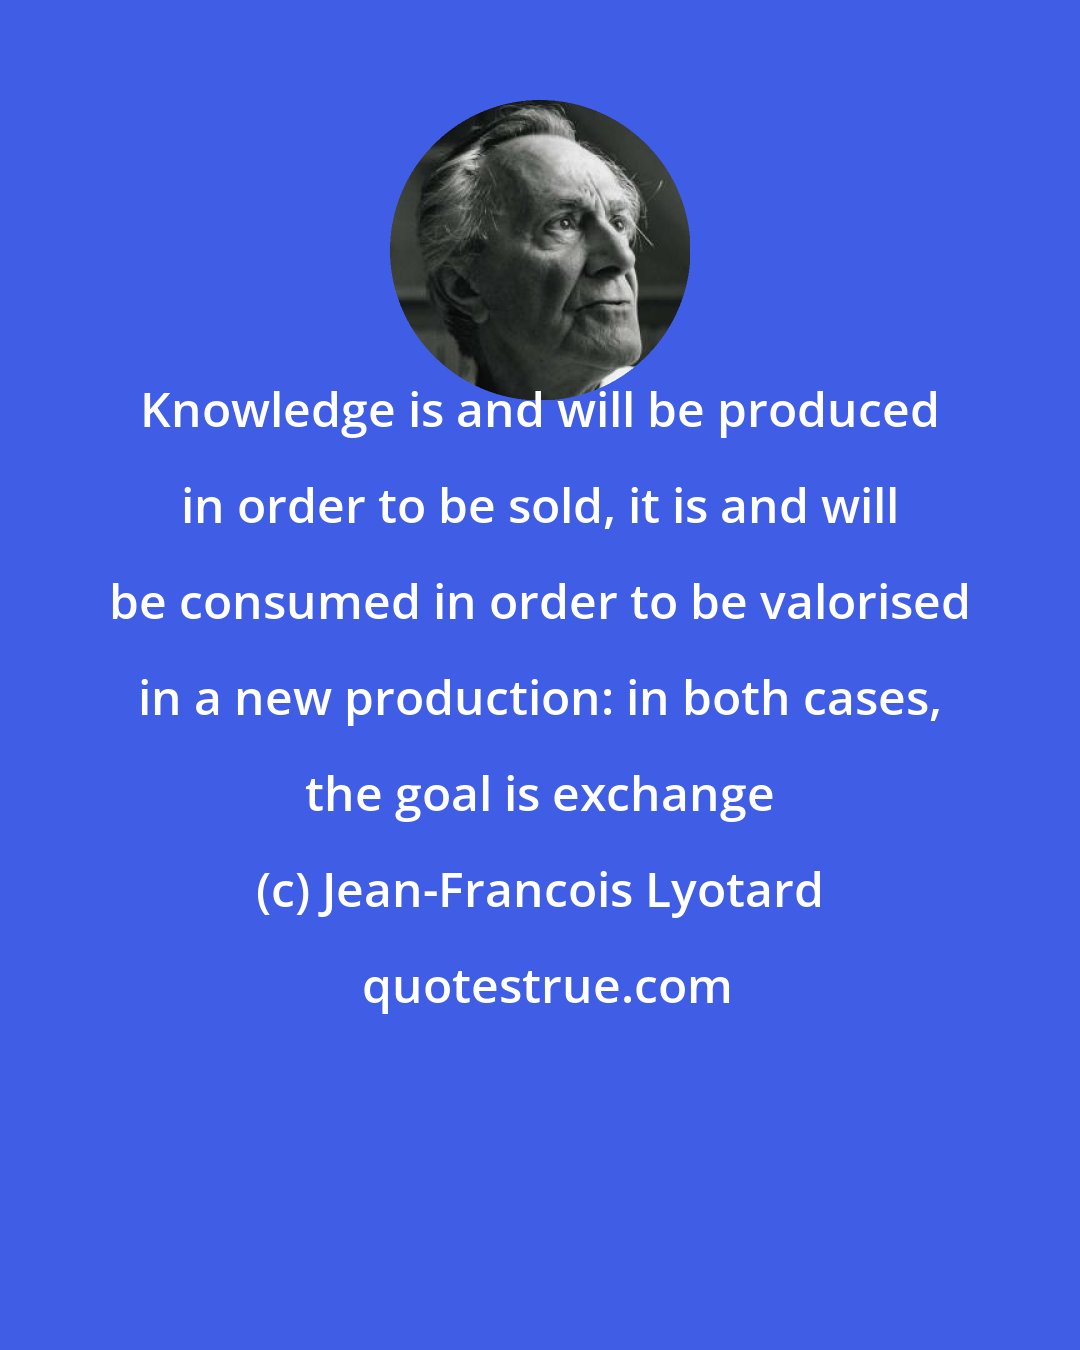 Jean-Francois Lyotard: Knowledge is and will be produced in order to be sold, it is and will be consumed in order to be valorised in a new production: in both cases, the goal is exchange